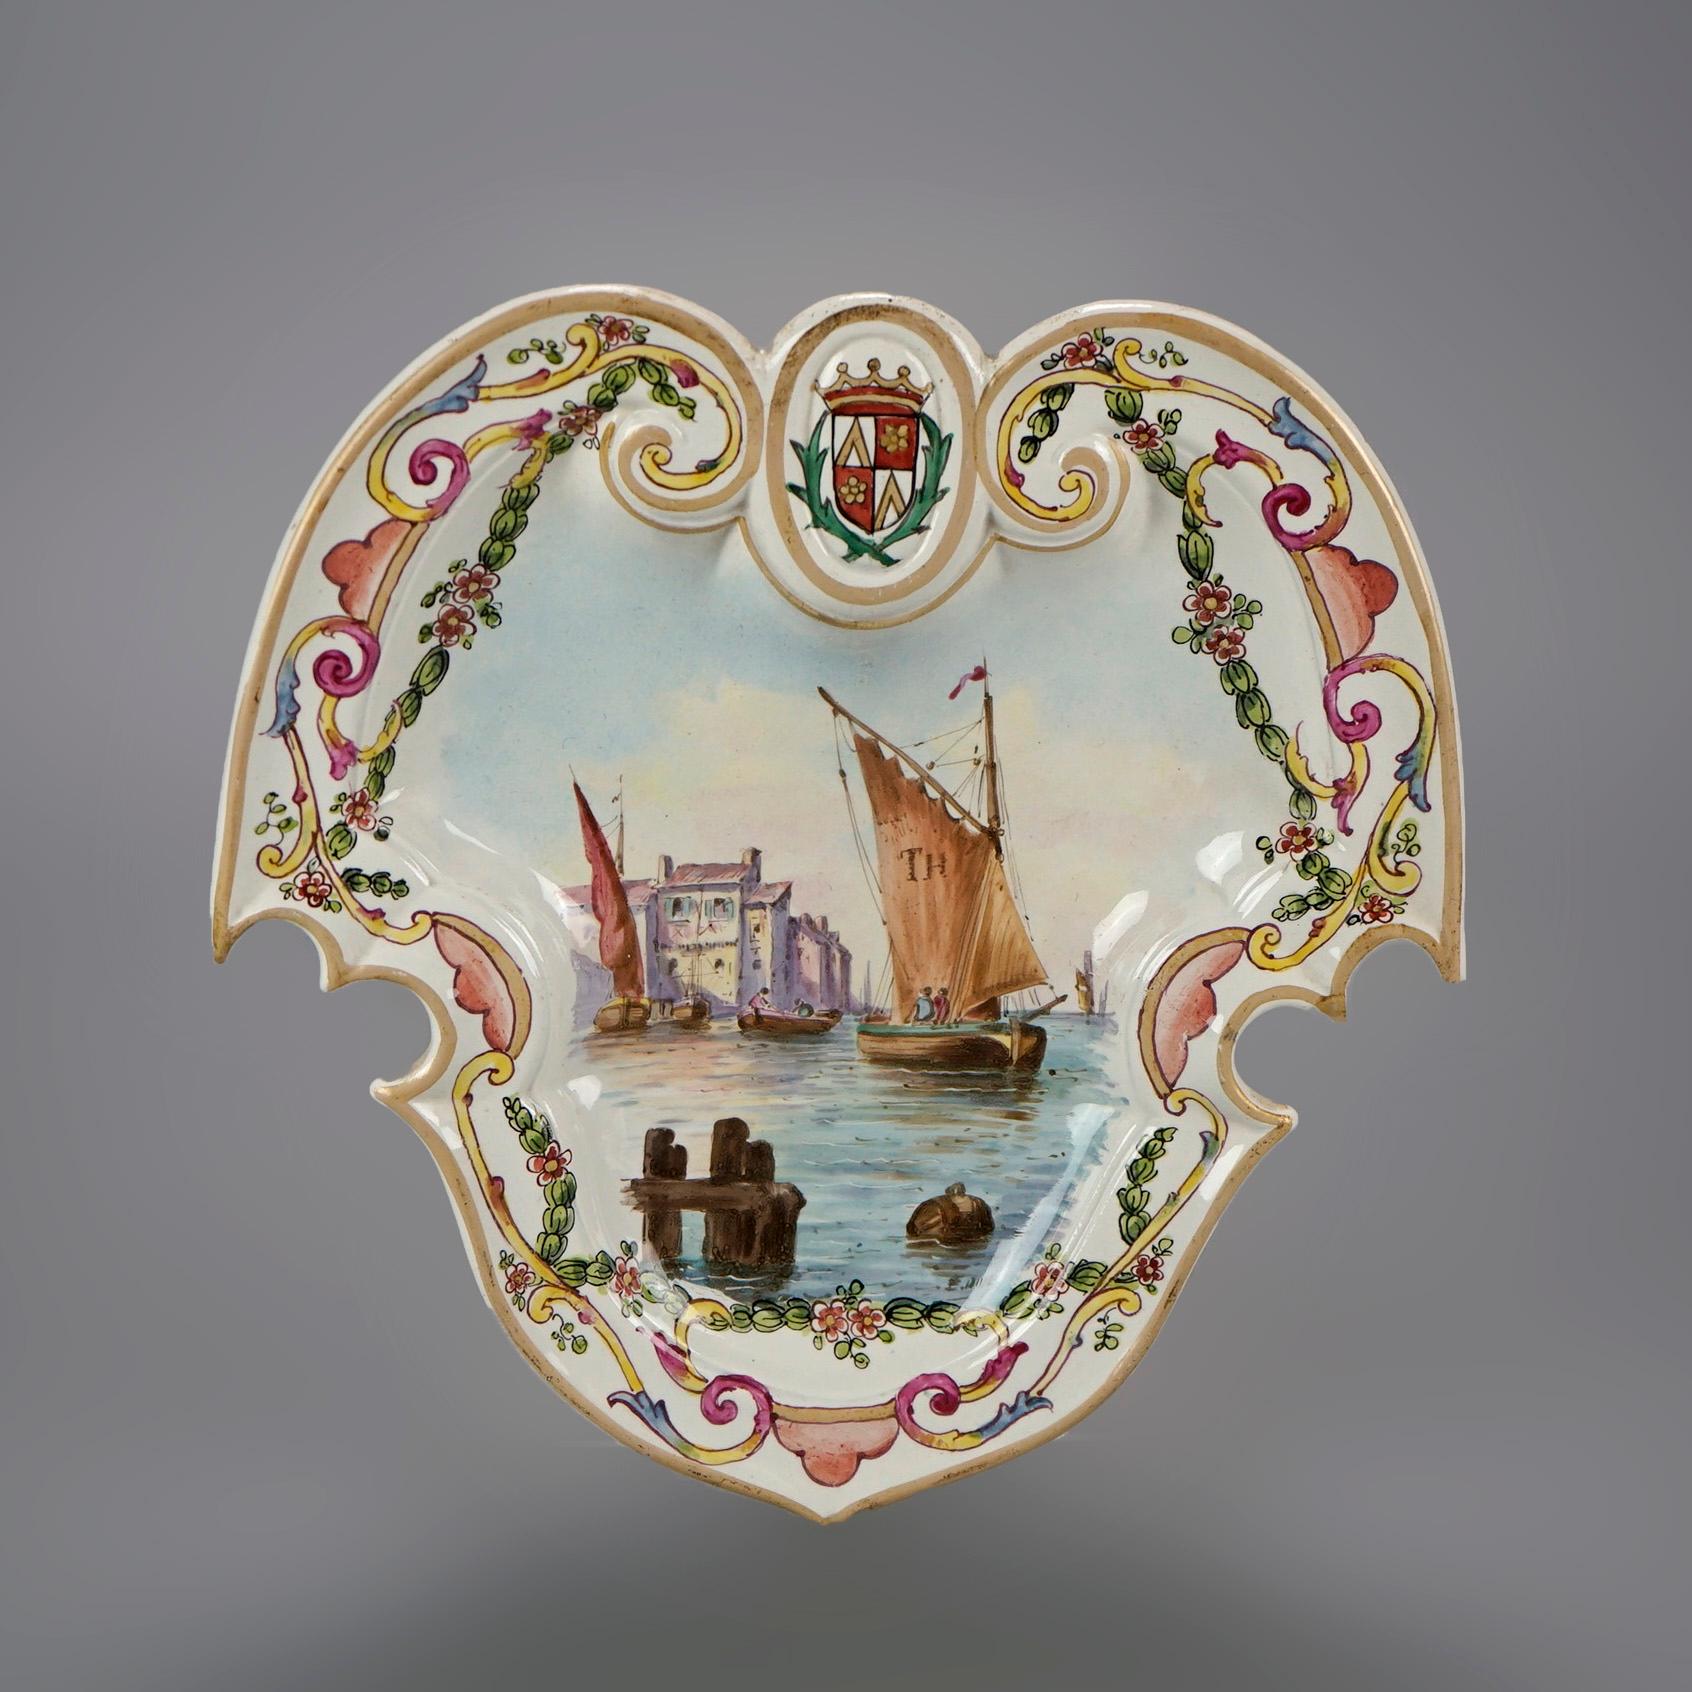 A pair of antique French soft paste faience porcelain plates by Lille offer shield form with hand painted maritime scenes, gilt highlights throughout, and maker mark en verso as photographed, 18th century

Measures- 9.5''H x 9.25''W x 1.5''D.